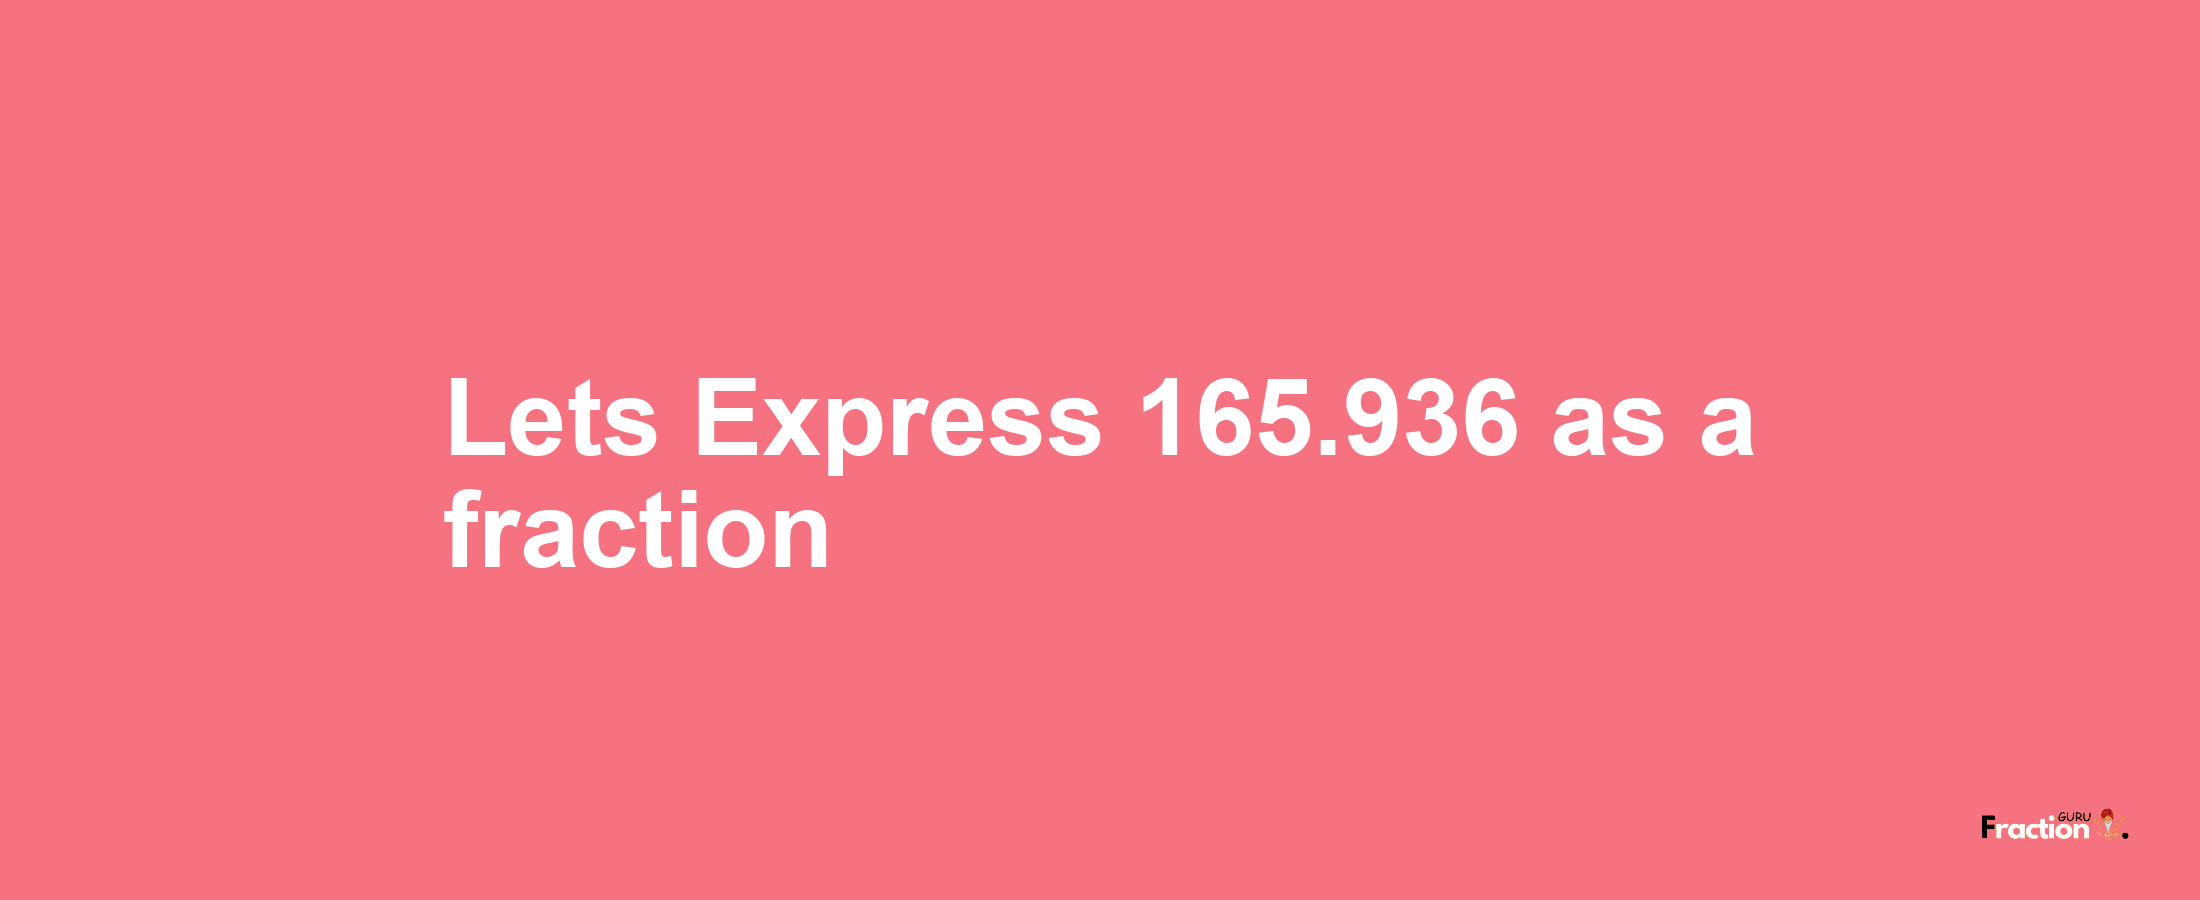 Lets Express 165.936 as afraction